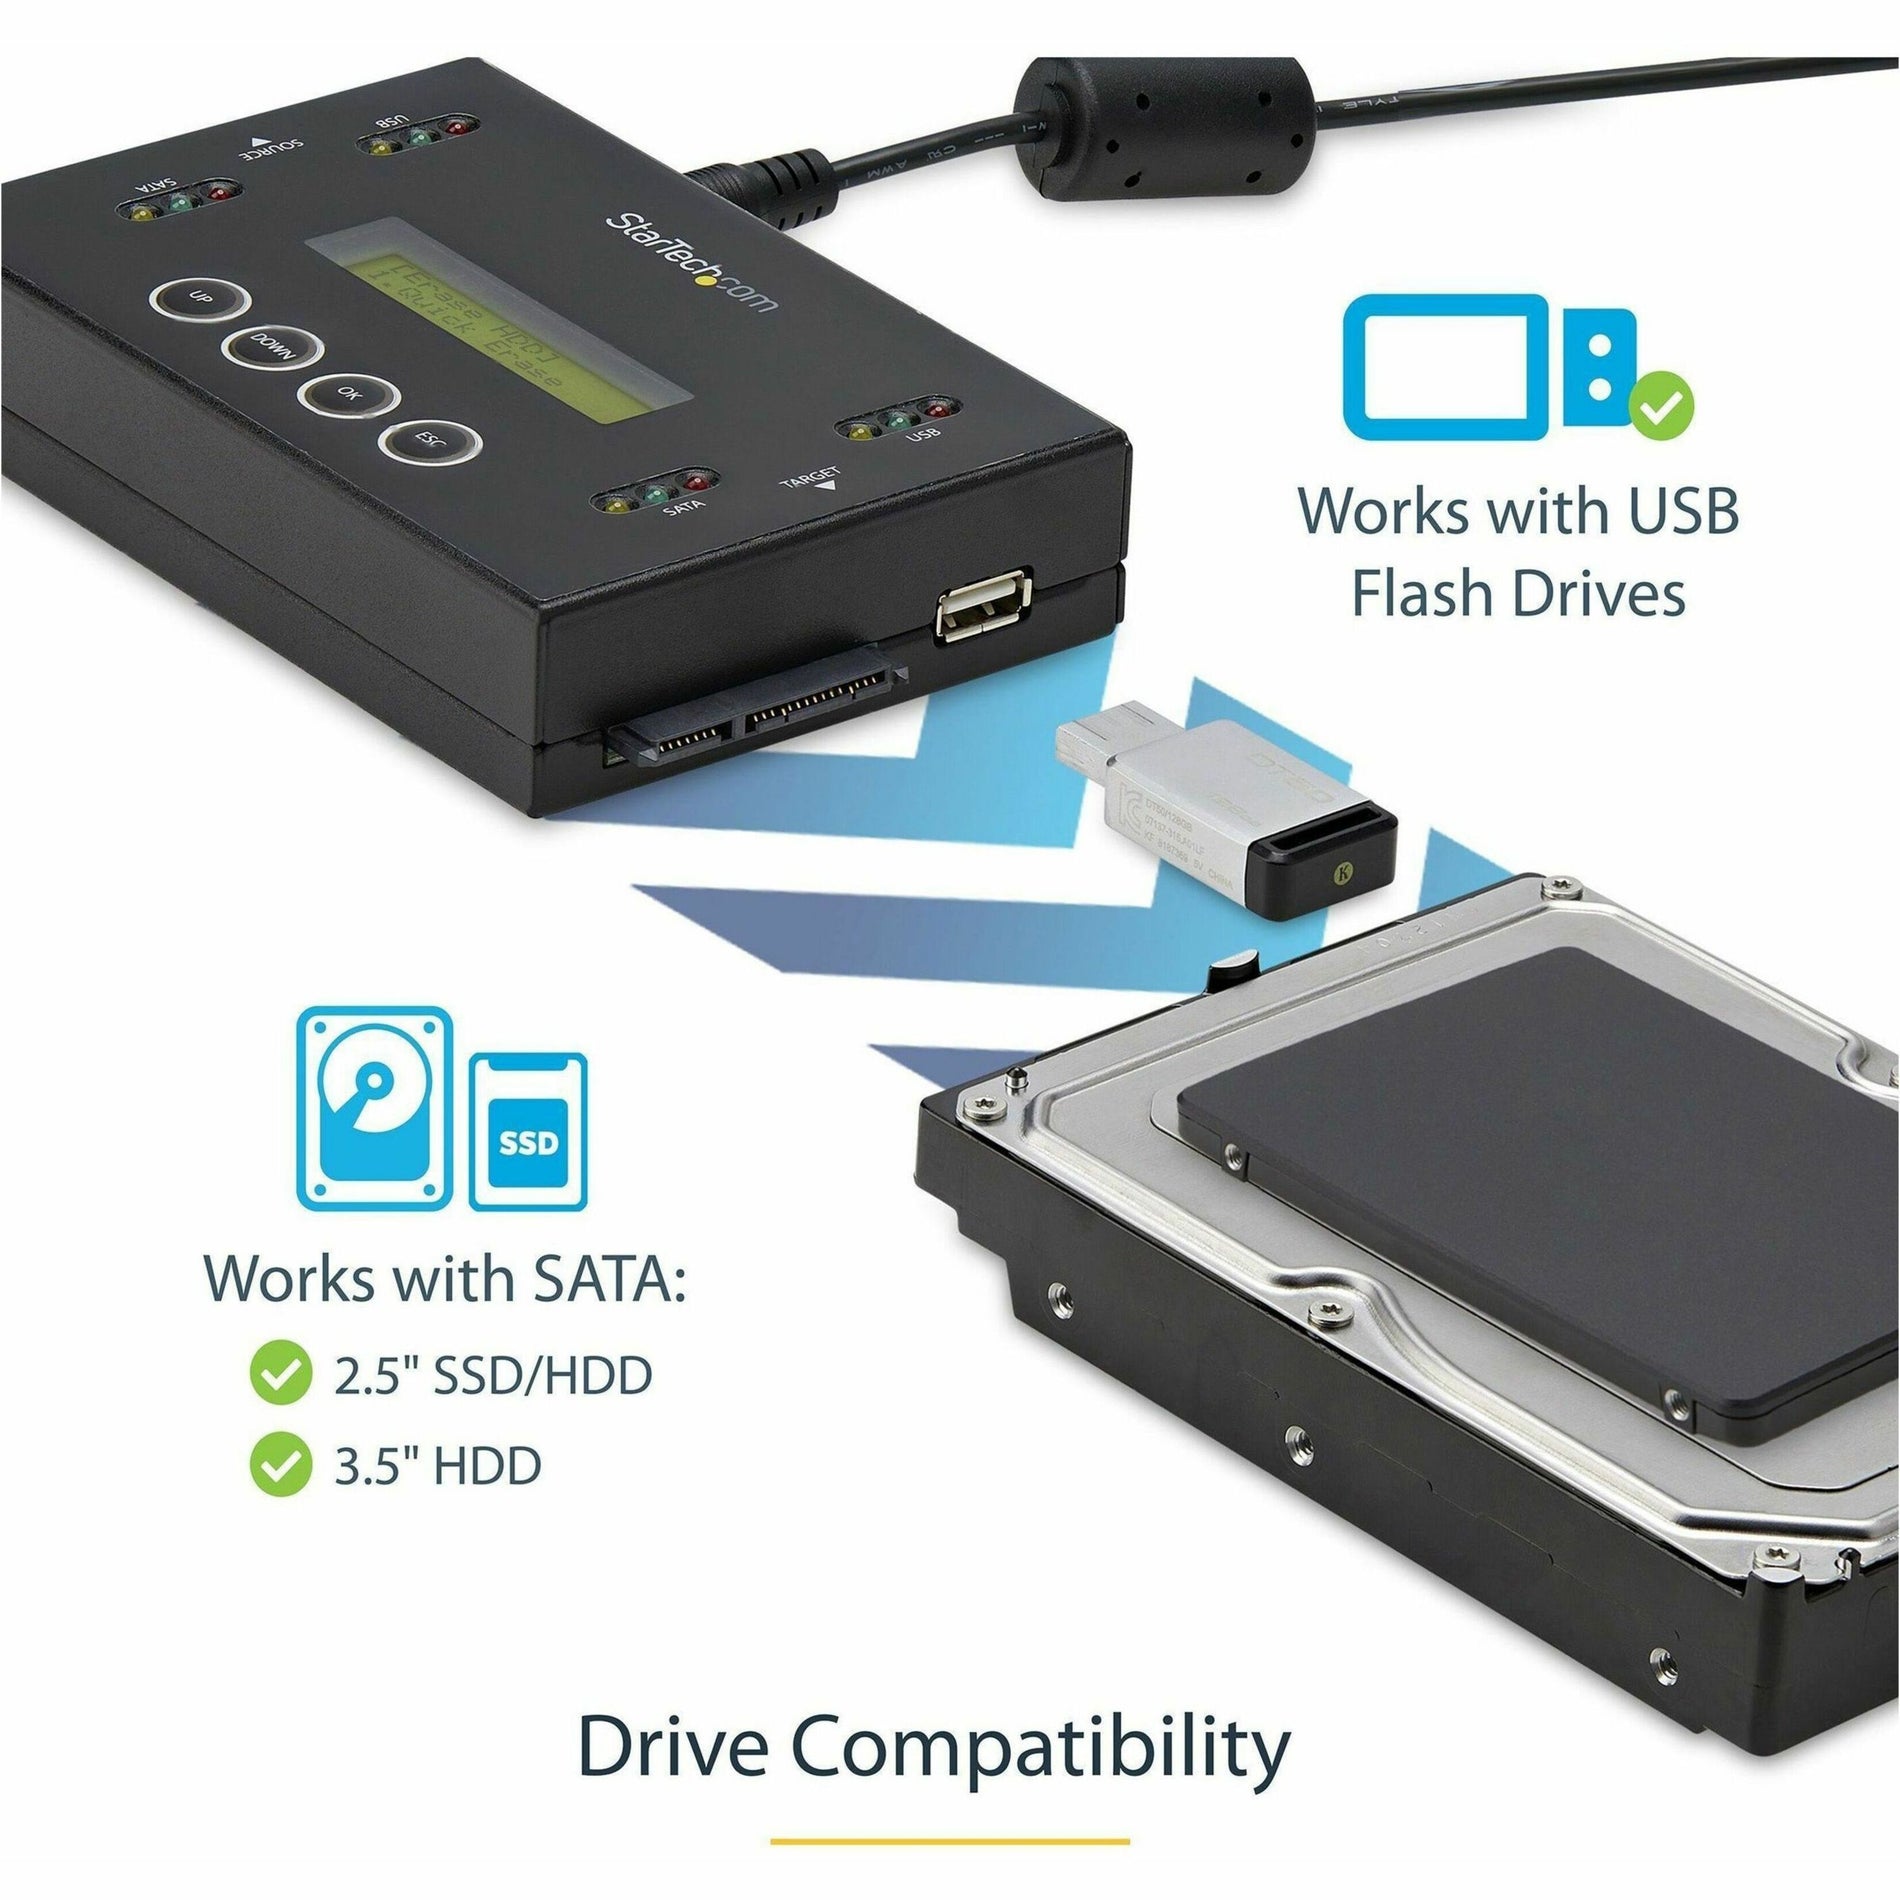 StarTech.com SU2DUPERA11 Drive Duplicator and Eraser for USB Flash Drives and 2.5 / 3.5" SATA Drives, Compact Design, 2 Year Warranty